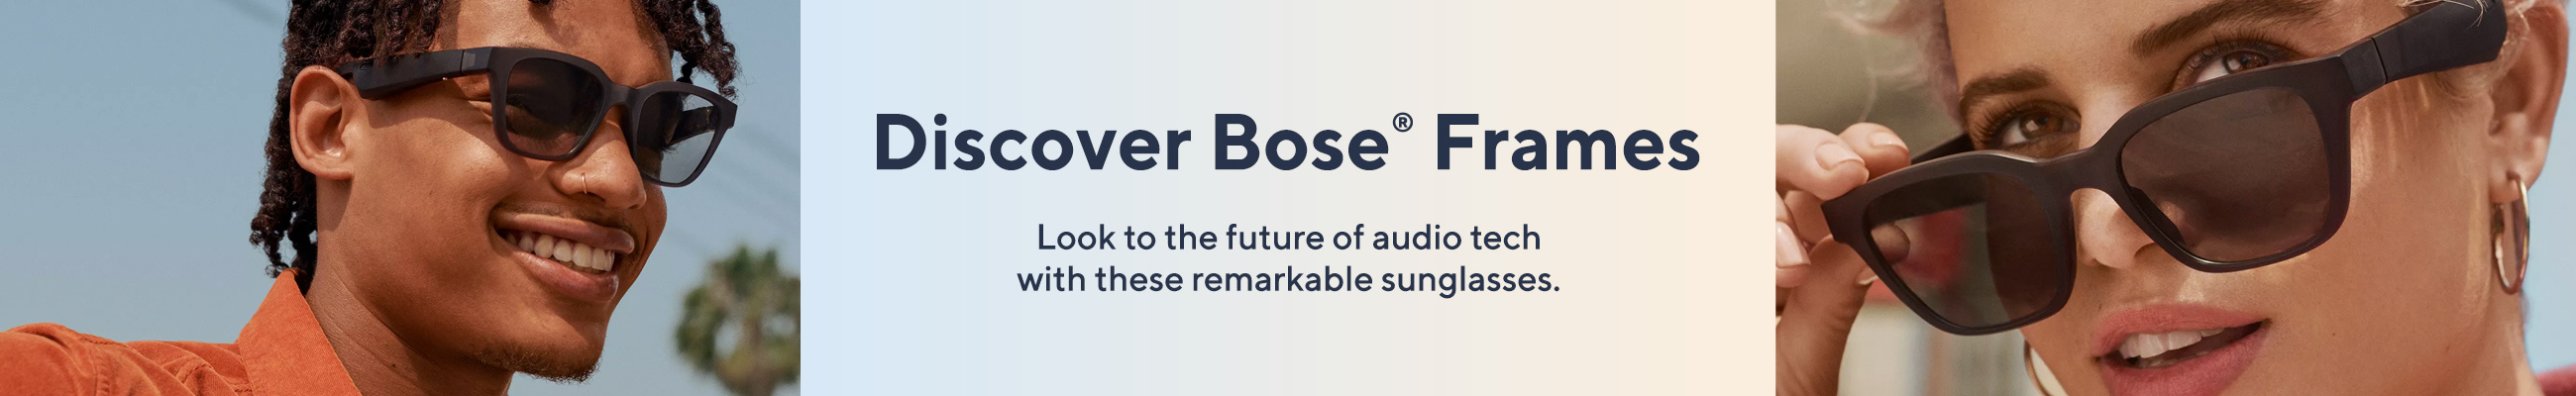 Discover Bose® Frames.  Look to the future of audio tech with these remarkable sunglasses.